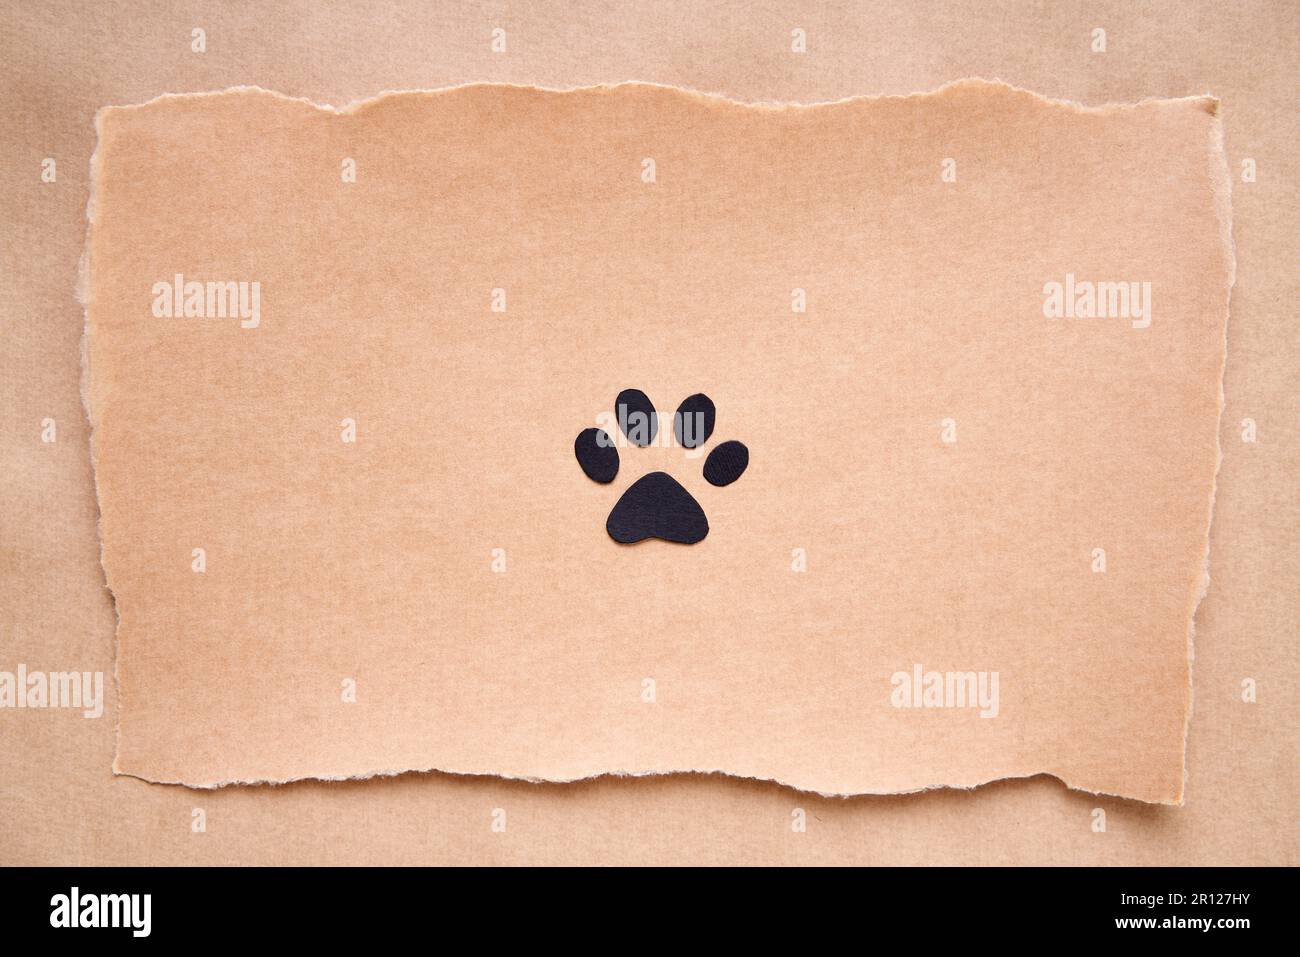 Paw print icon on craft paper with ripped edges, paper art style. animal love concept, greeting card, invitation mockup. Flat lay, top view, copy spac Stock Photo